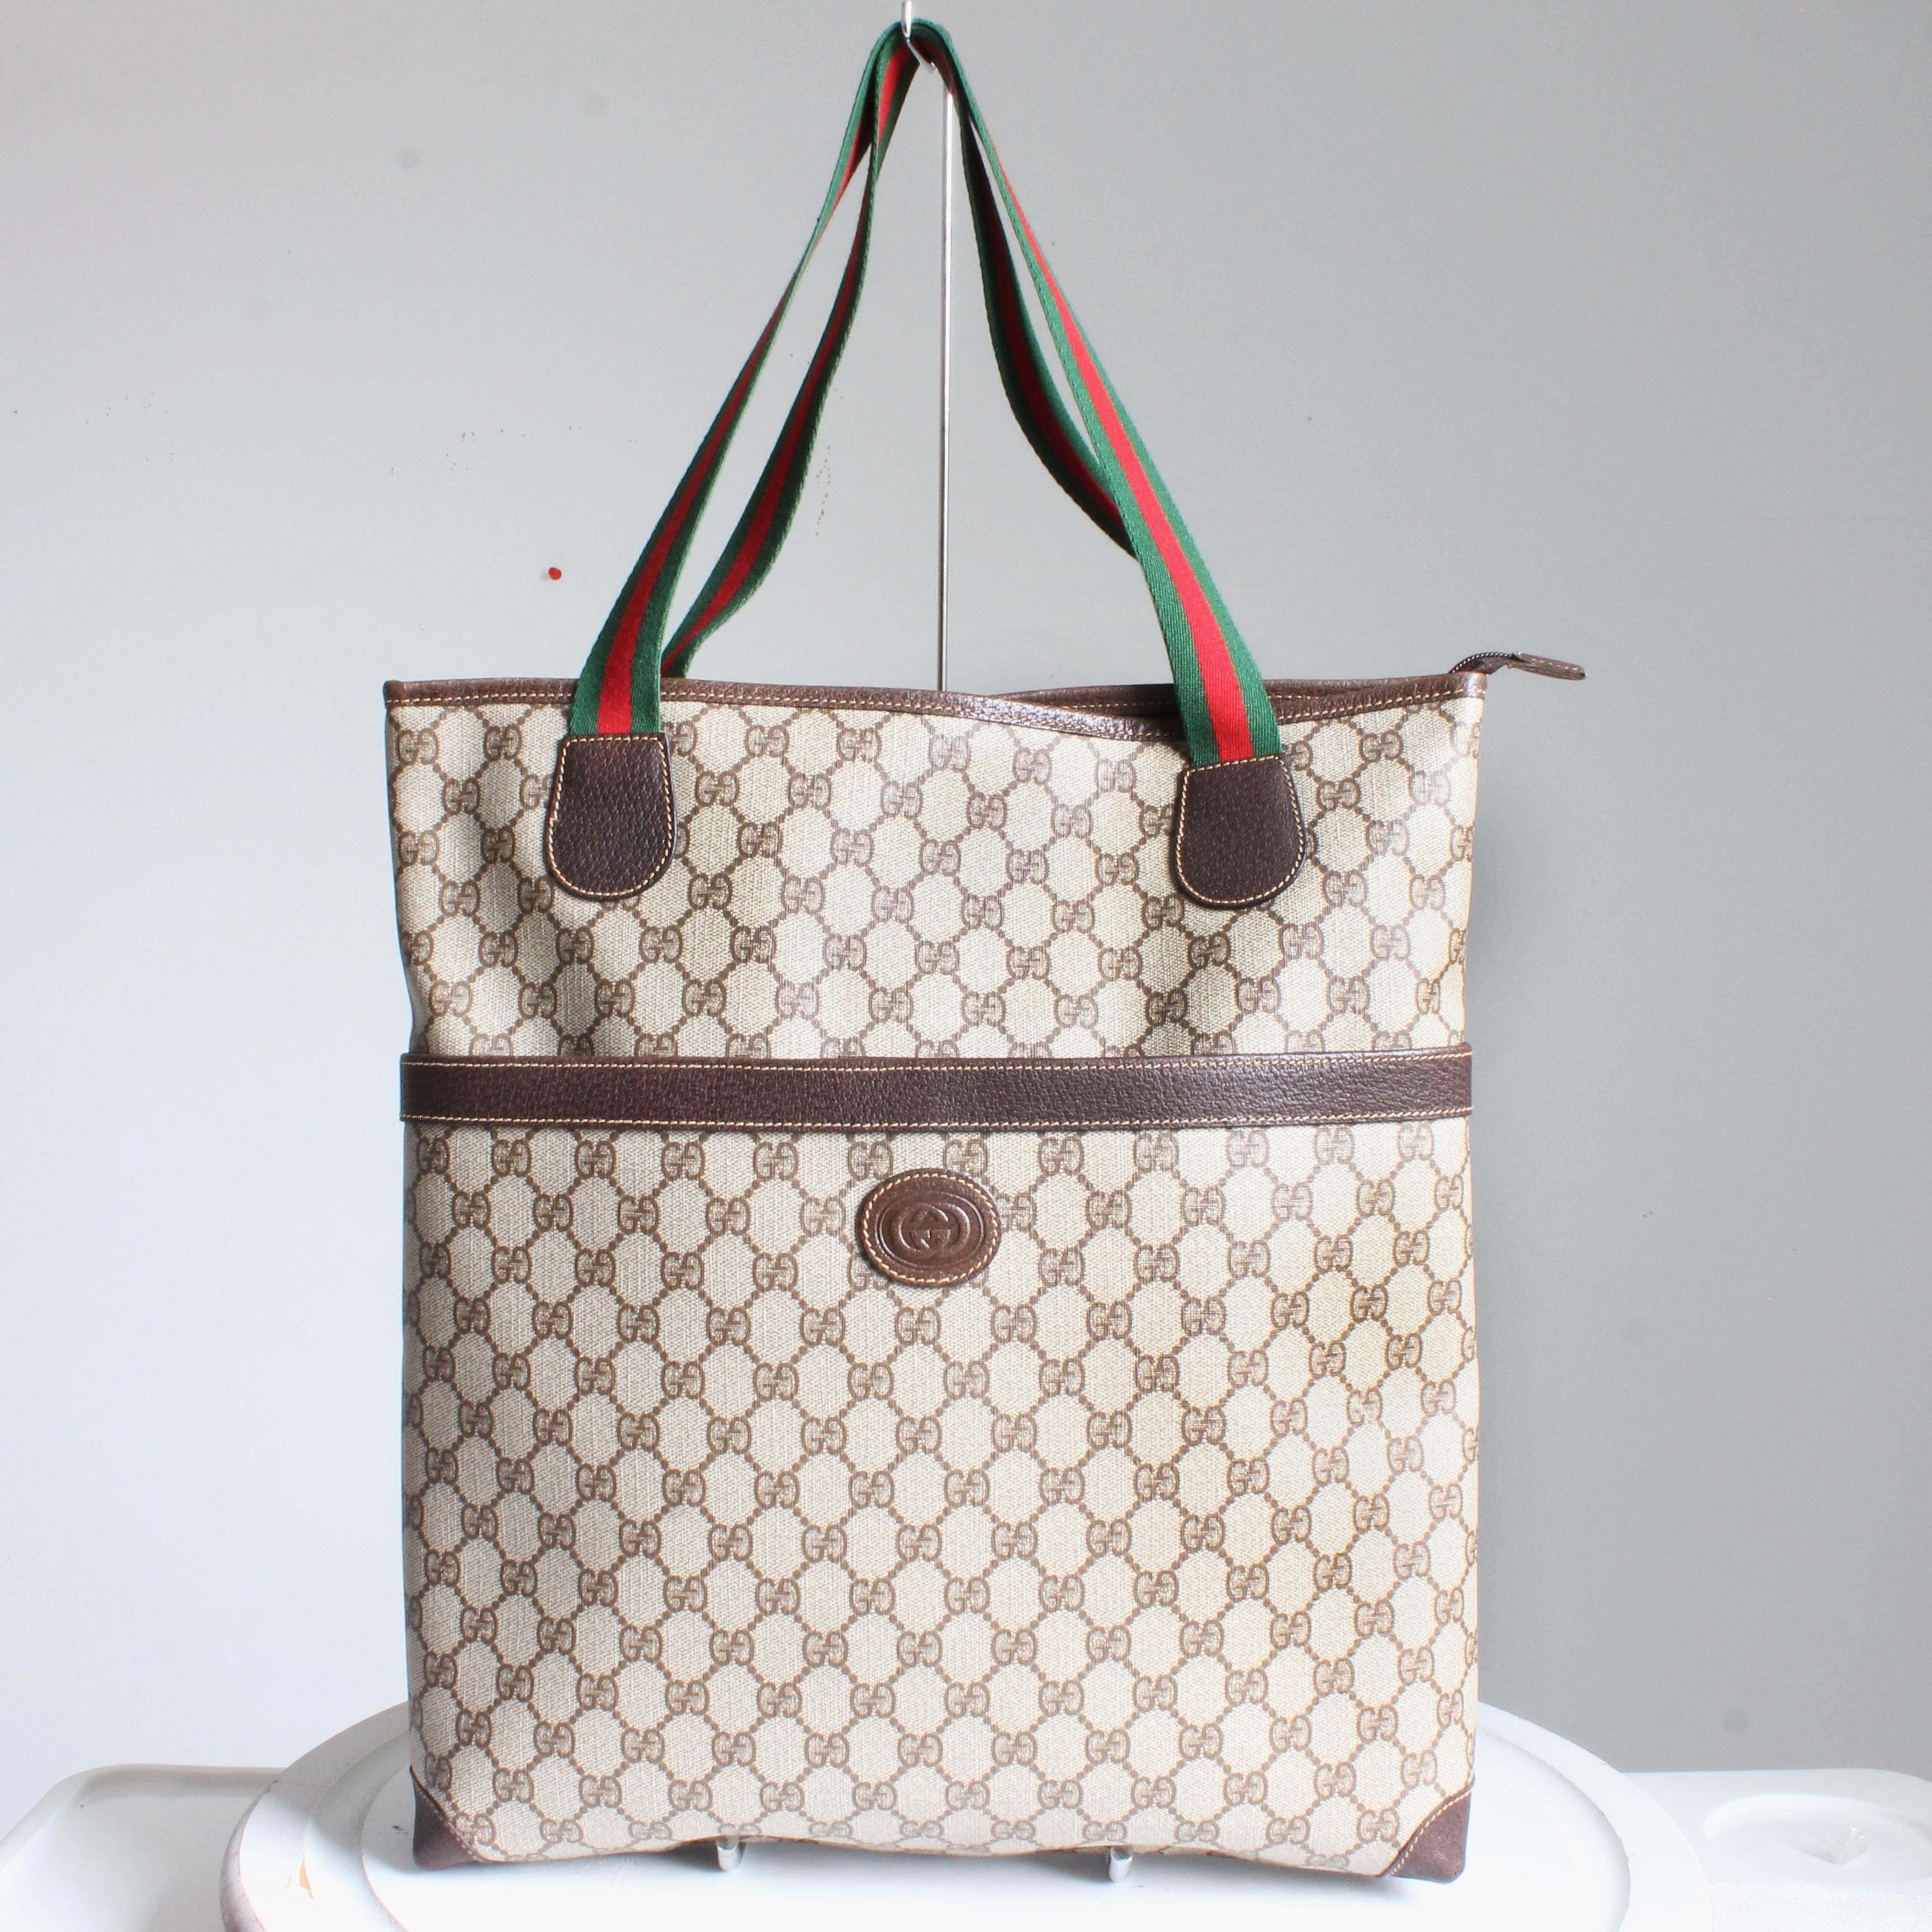 Authentic, preowned, vintage Gucci GG Plus Web tote, likely made in the 80s.  Made from Gucci's GG canvas, it's trimmed in brown leather and features Gucci's signature webbing on the straps, with a large magnetic snap pocket in front.  The interior